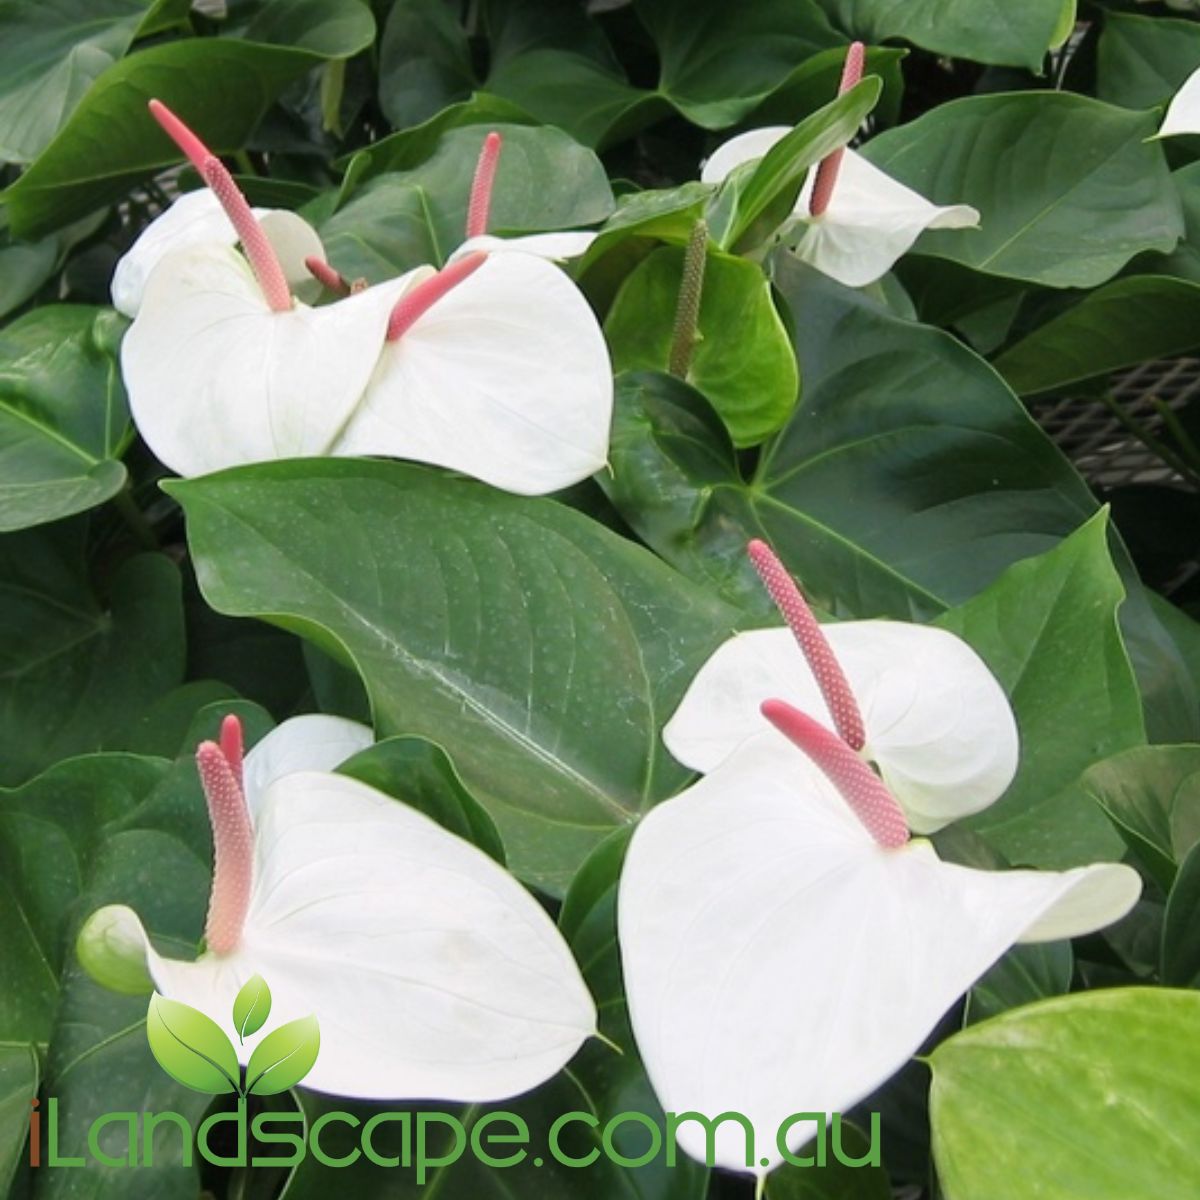 Anthurium White Heart has a beautiful pure white flower and a red to pink spandix with lovely waxy green foliage. A must for your indoor collection